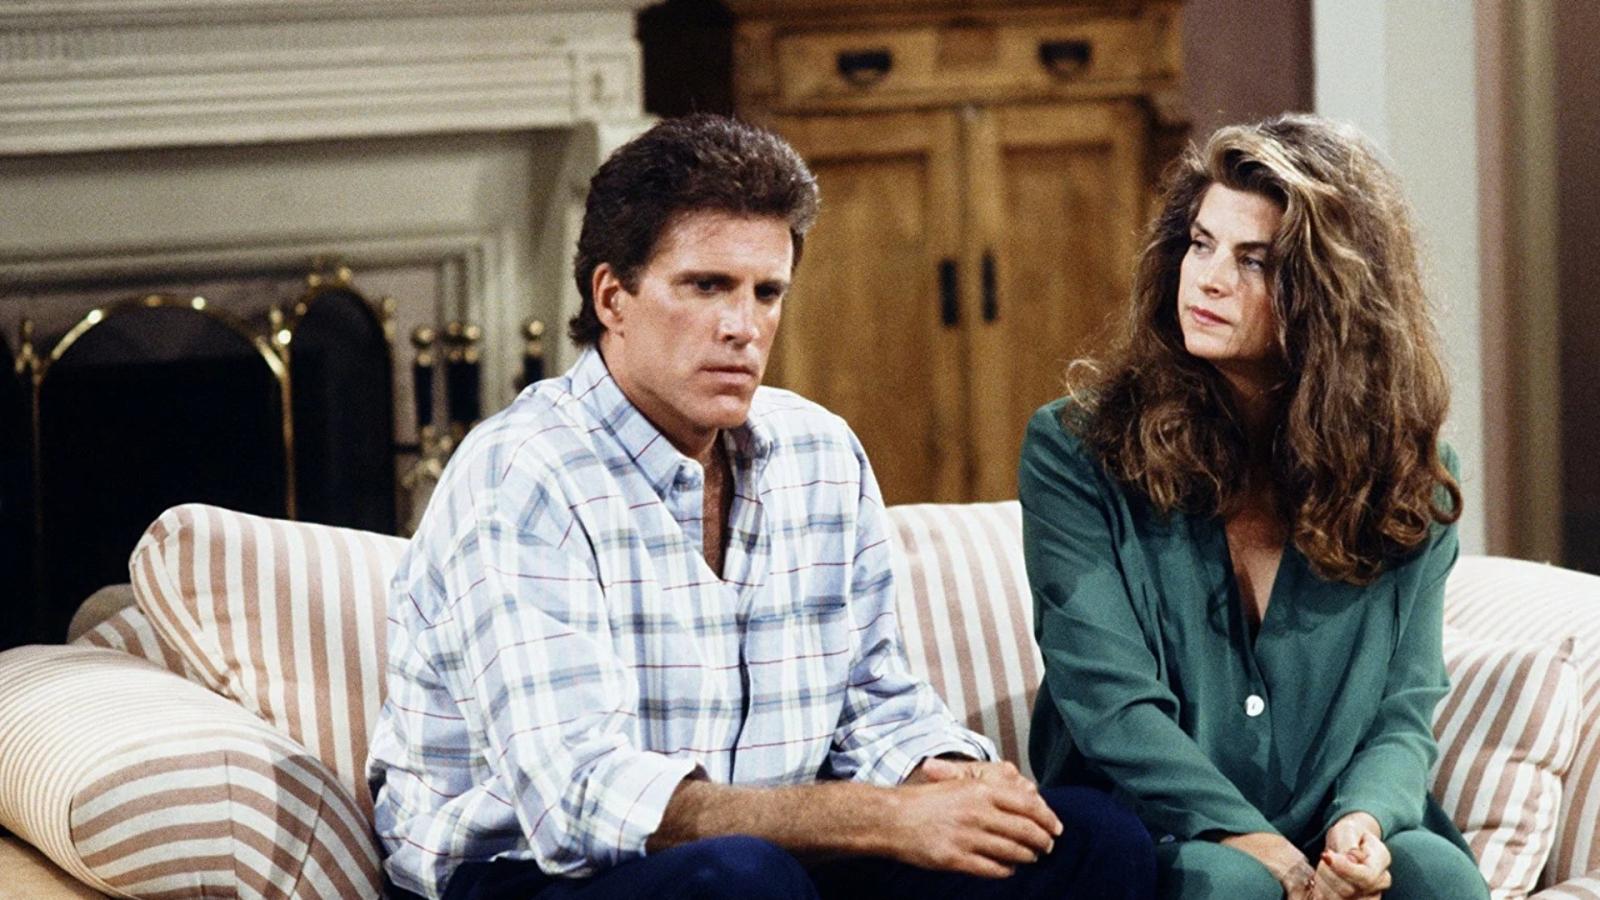 15 Vintage '80s Shows That Are More Binge-Worthy Than Today's Hits - image 3